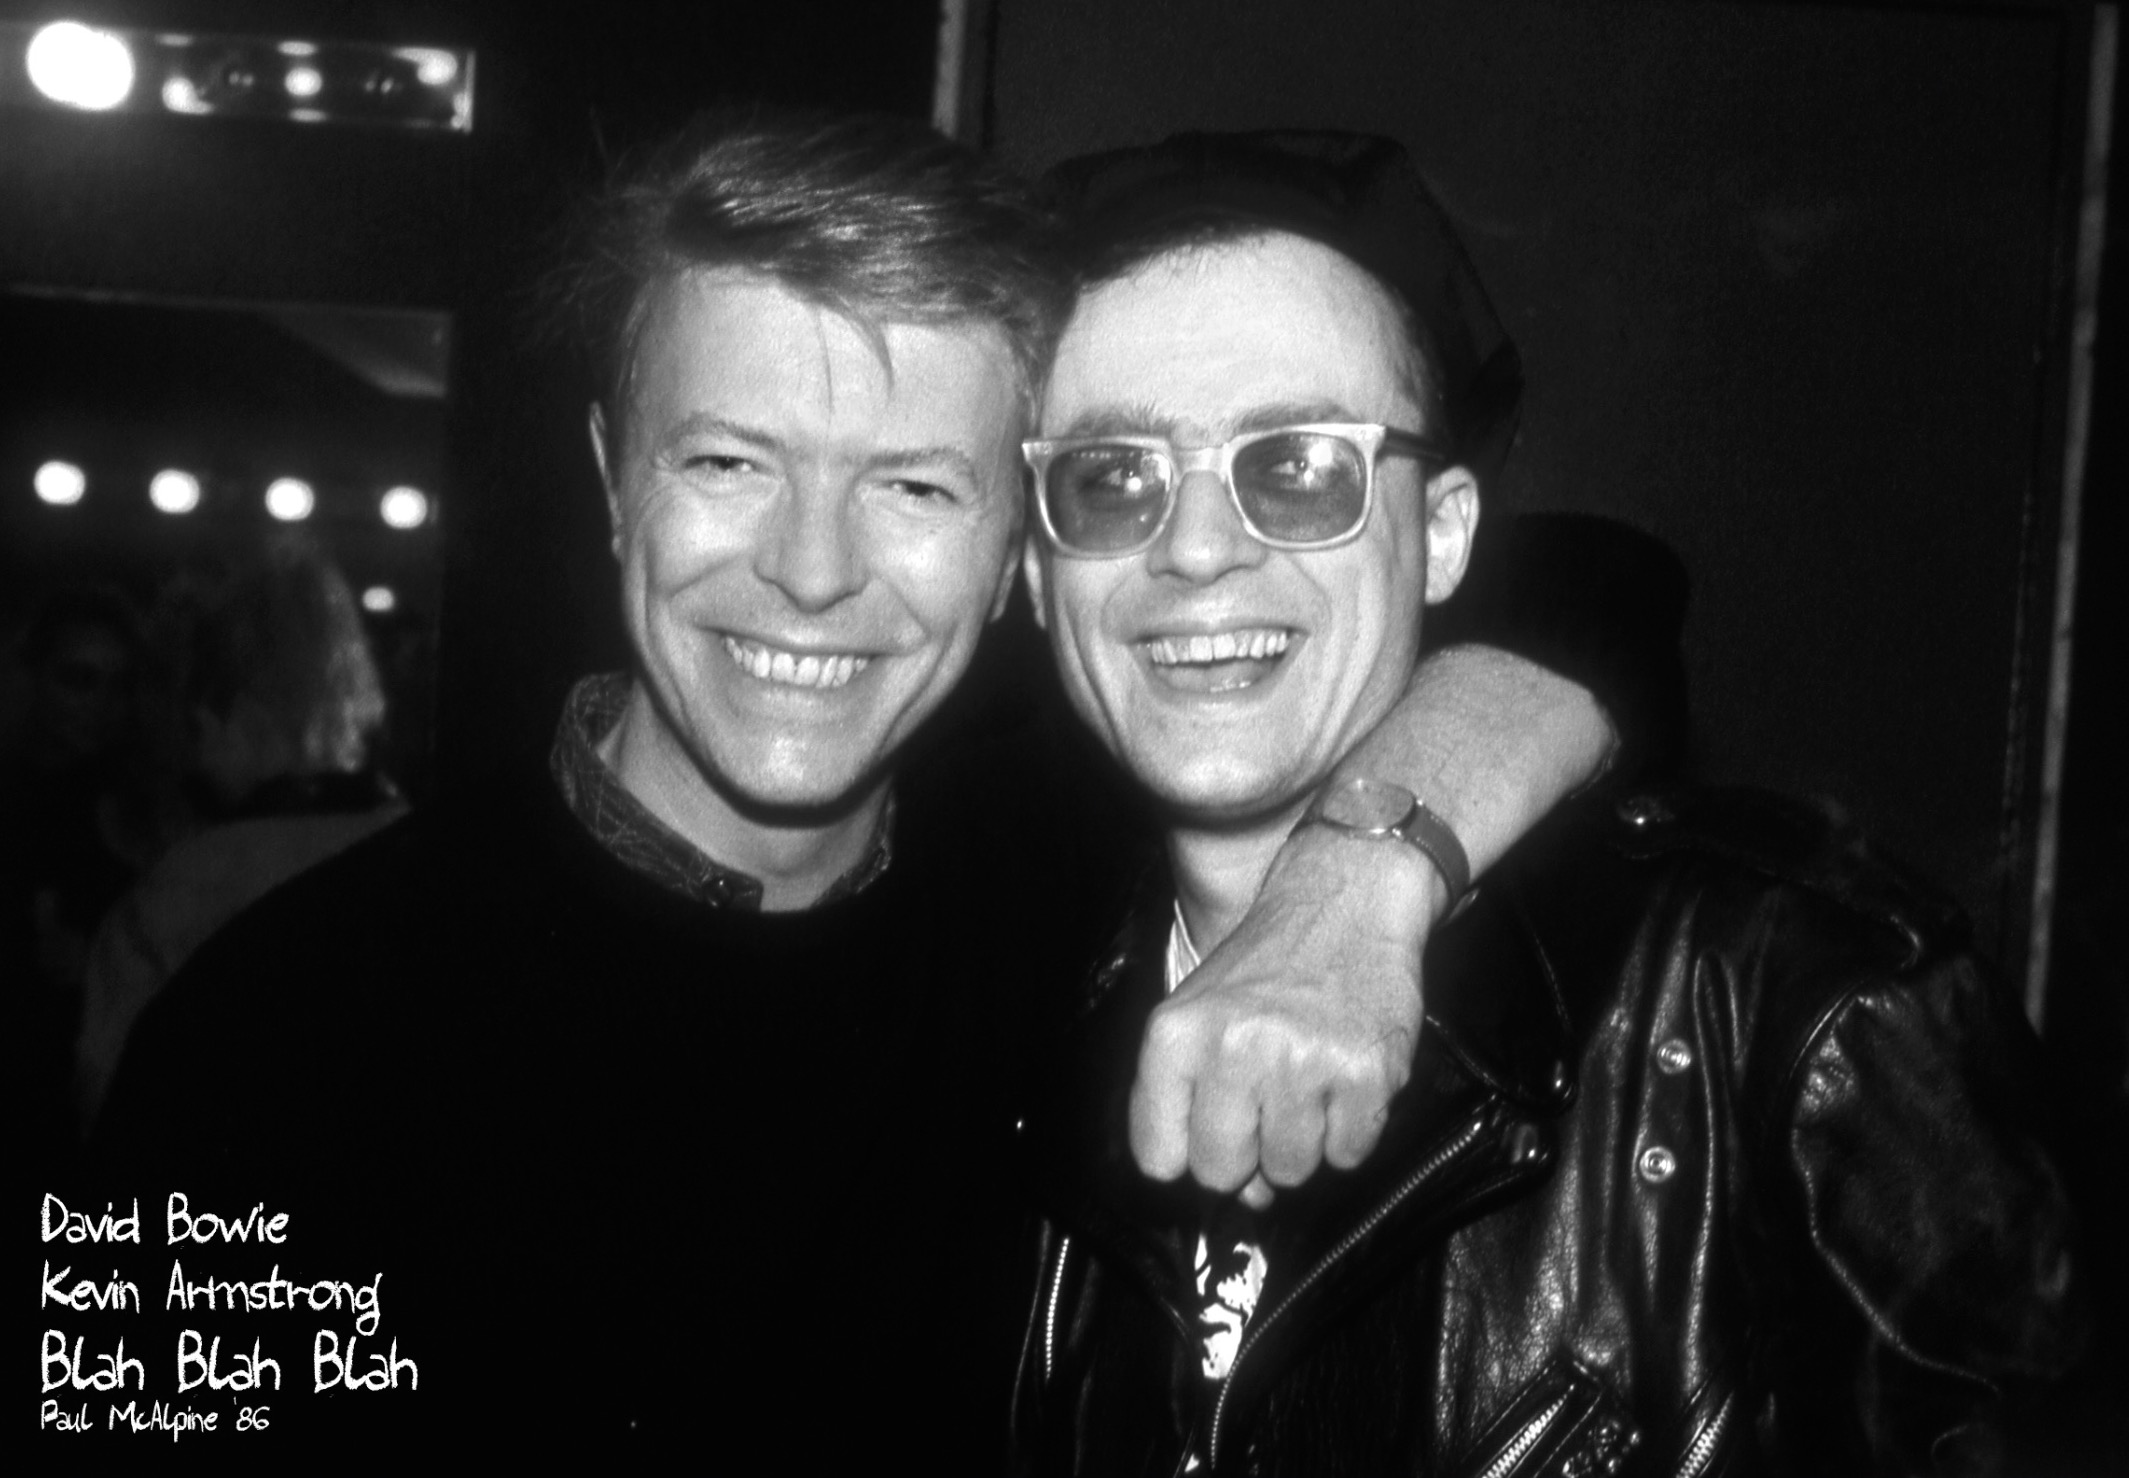 Kevin with David Bowie - Photo by Paul McAlpine